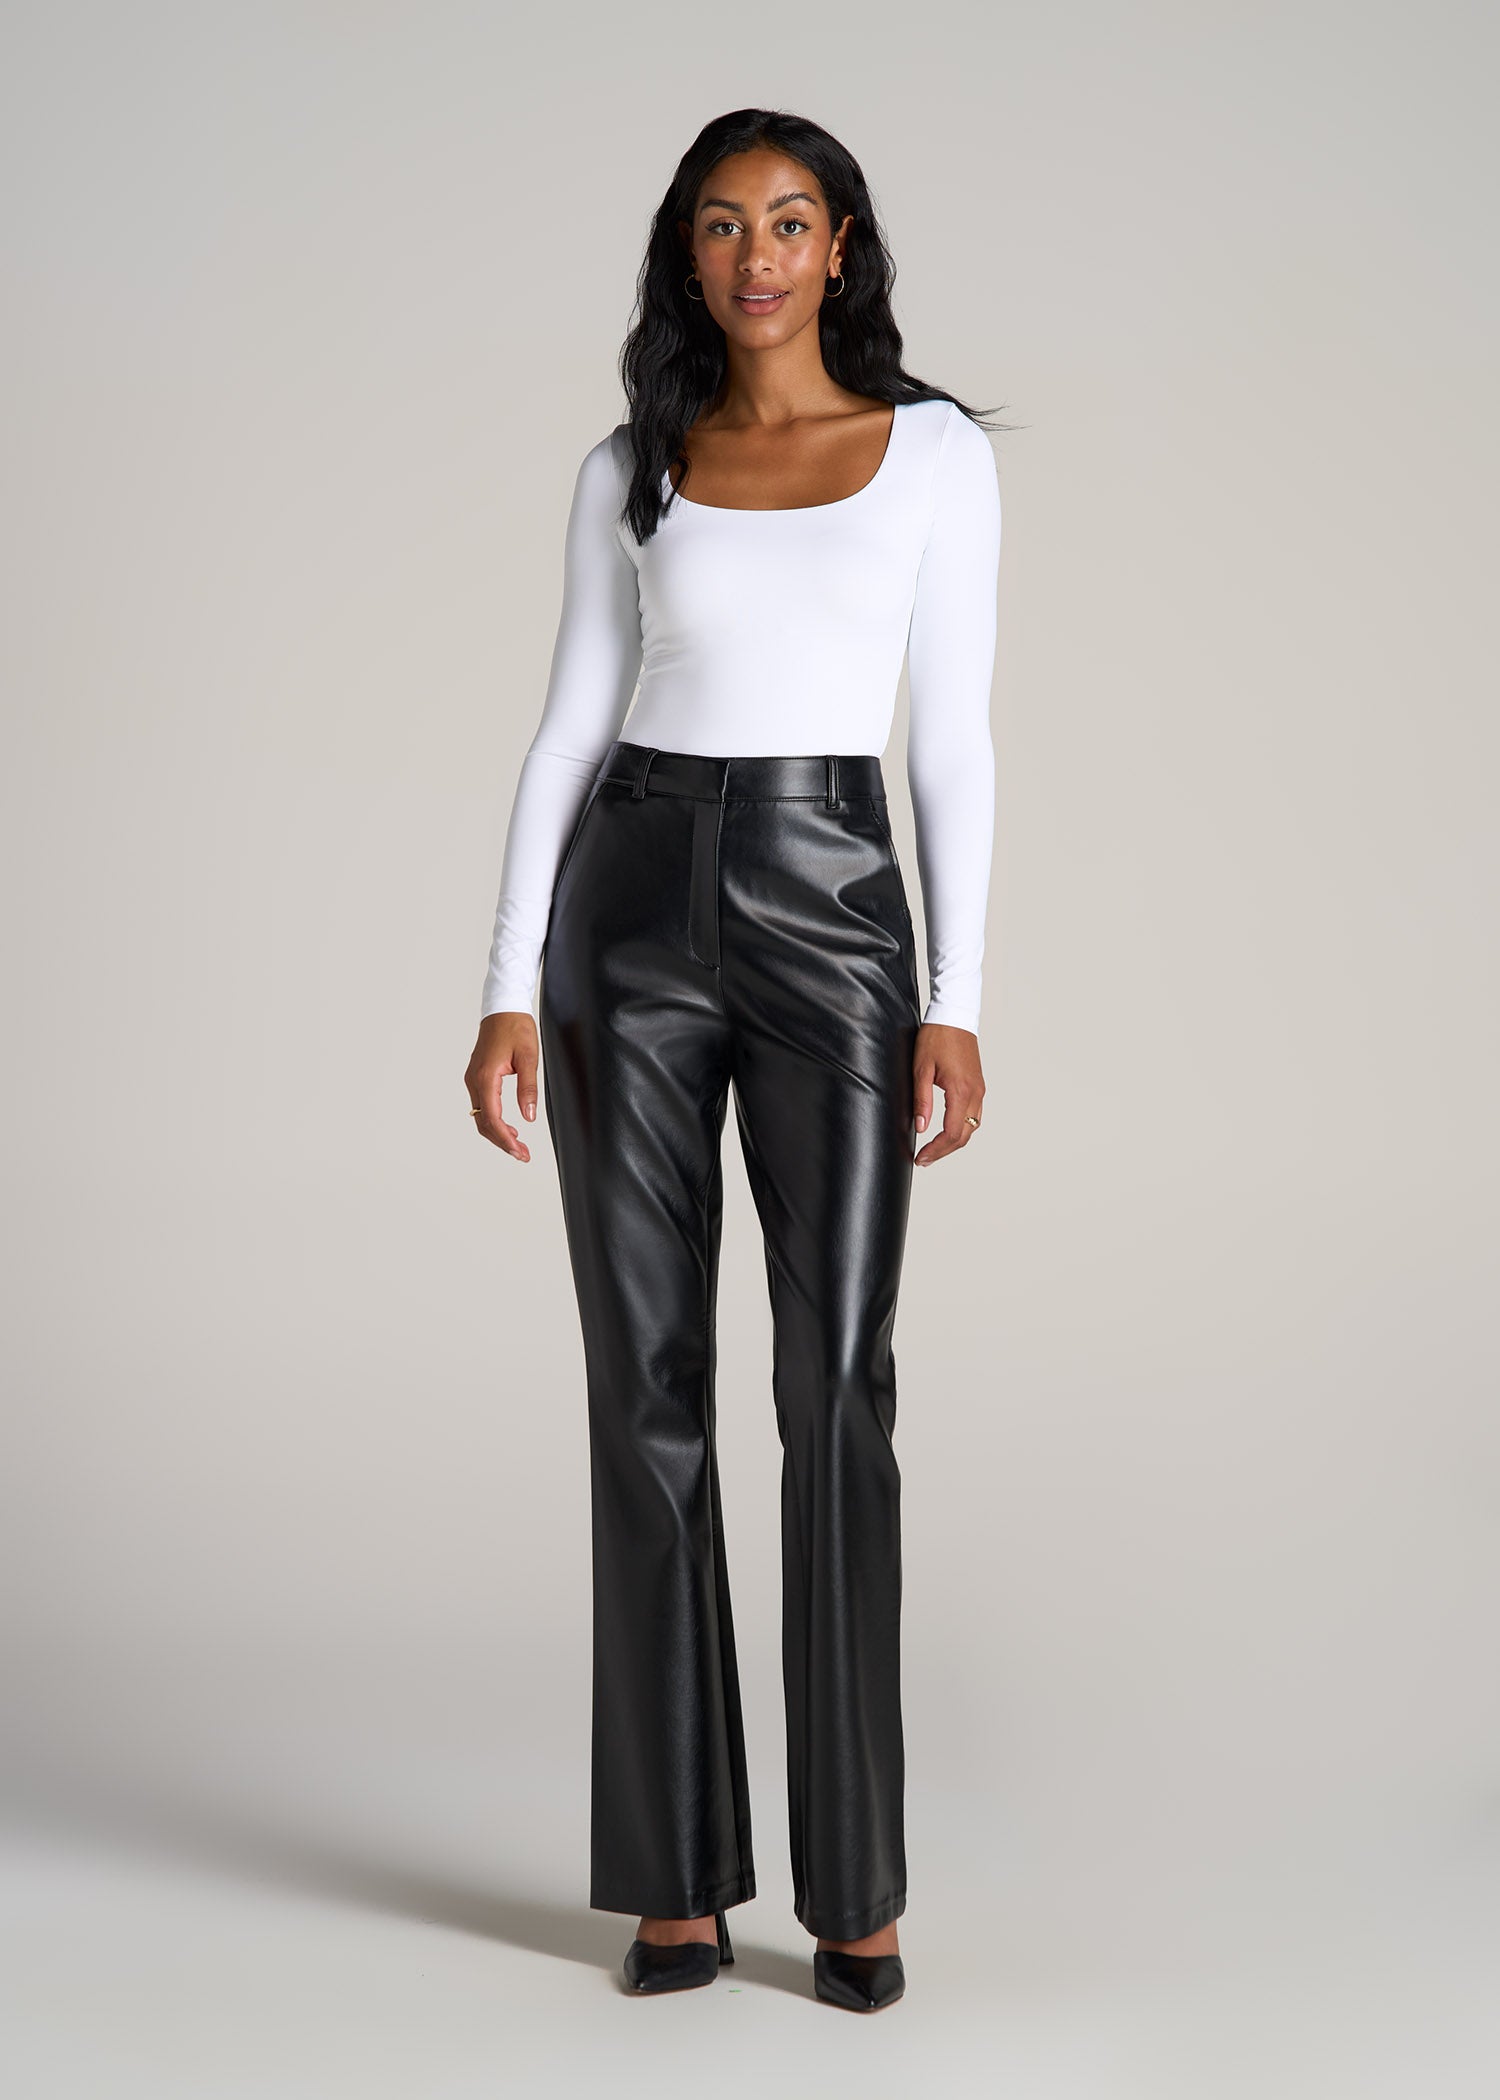 High Waist Pants Lady Leather, Leather Trousers Ladies